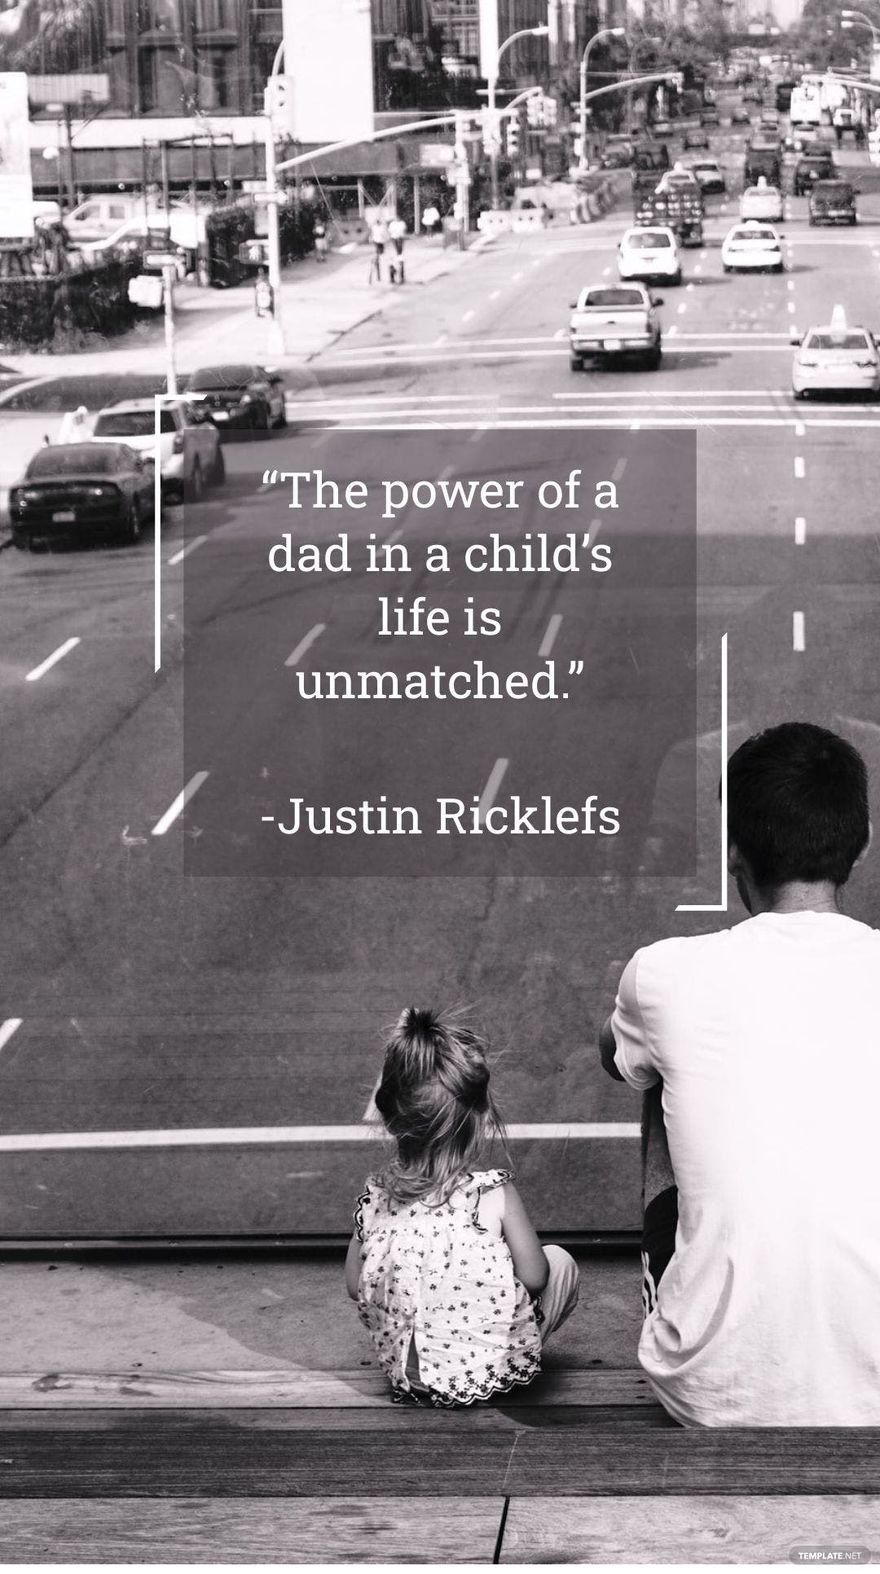 Justin Ricklefs - “The power of a dad in a child’s life is unmatched.” in JPG